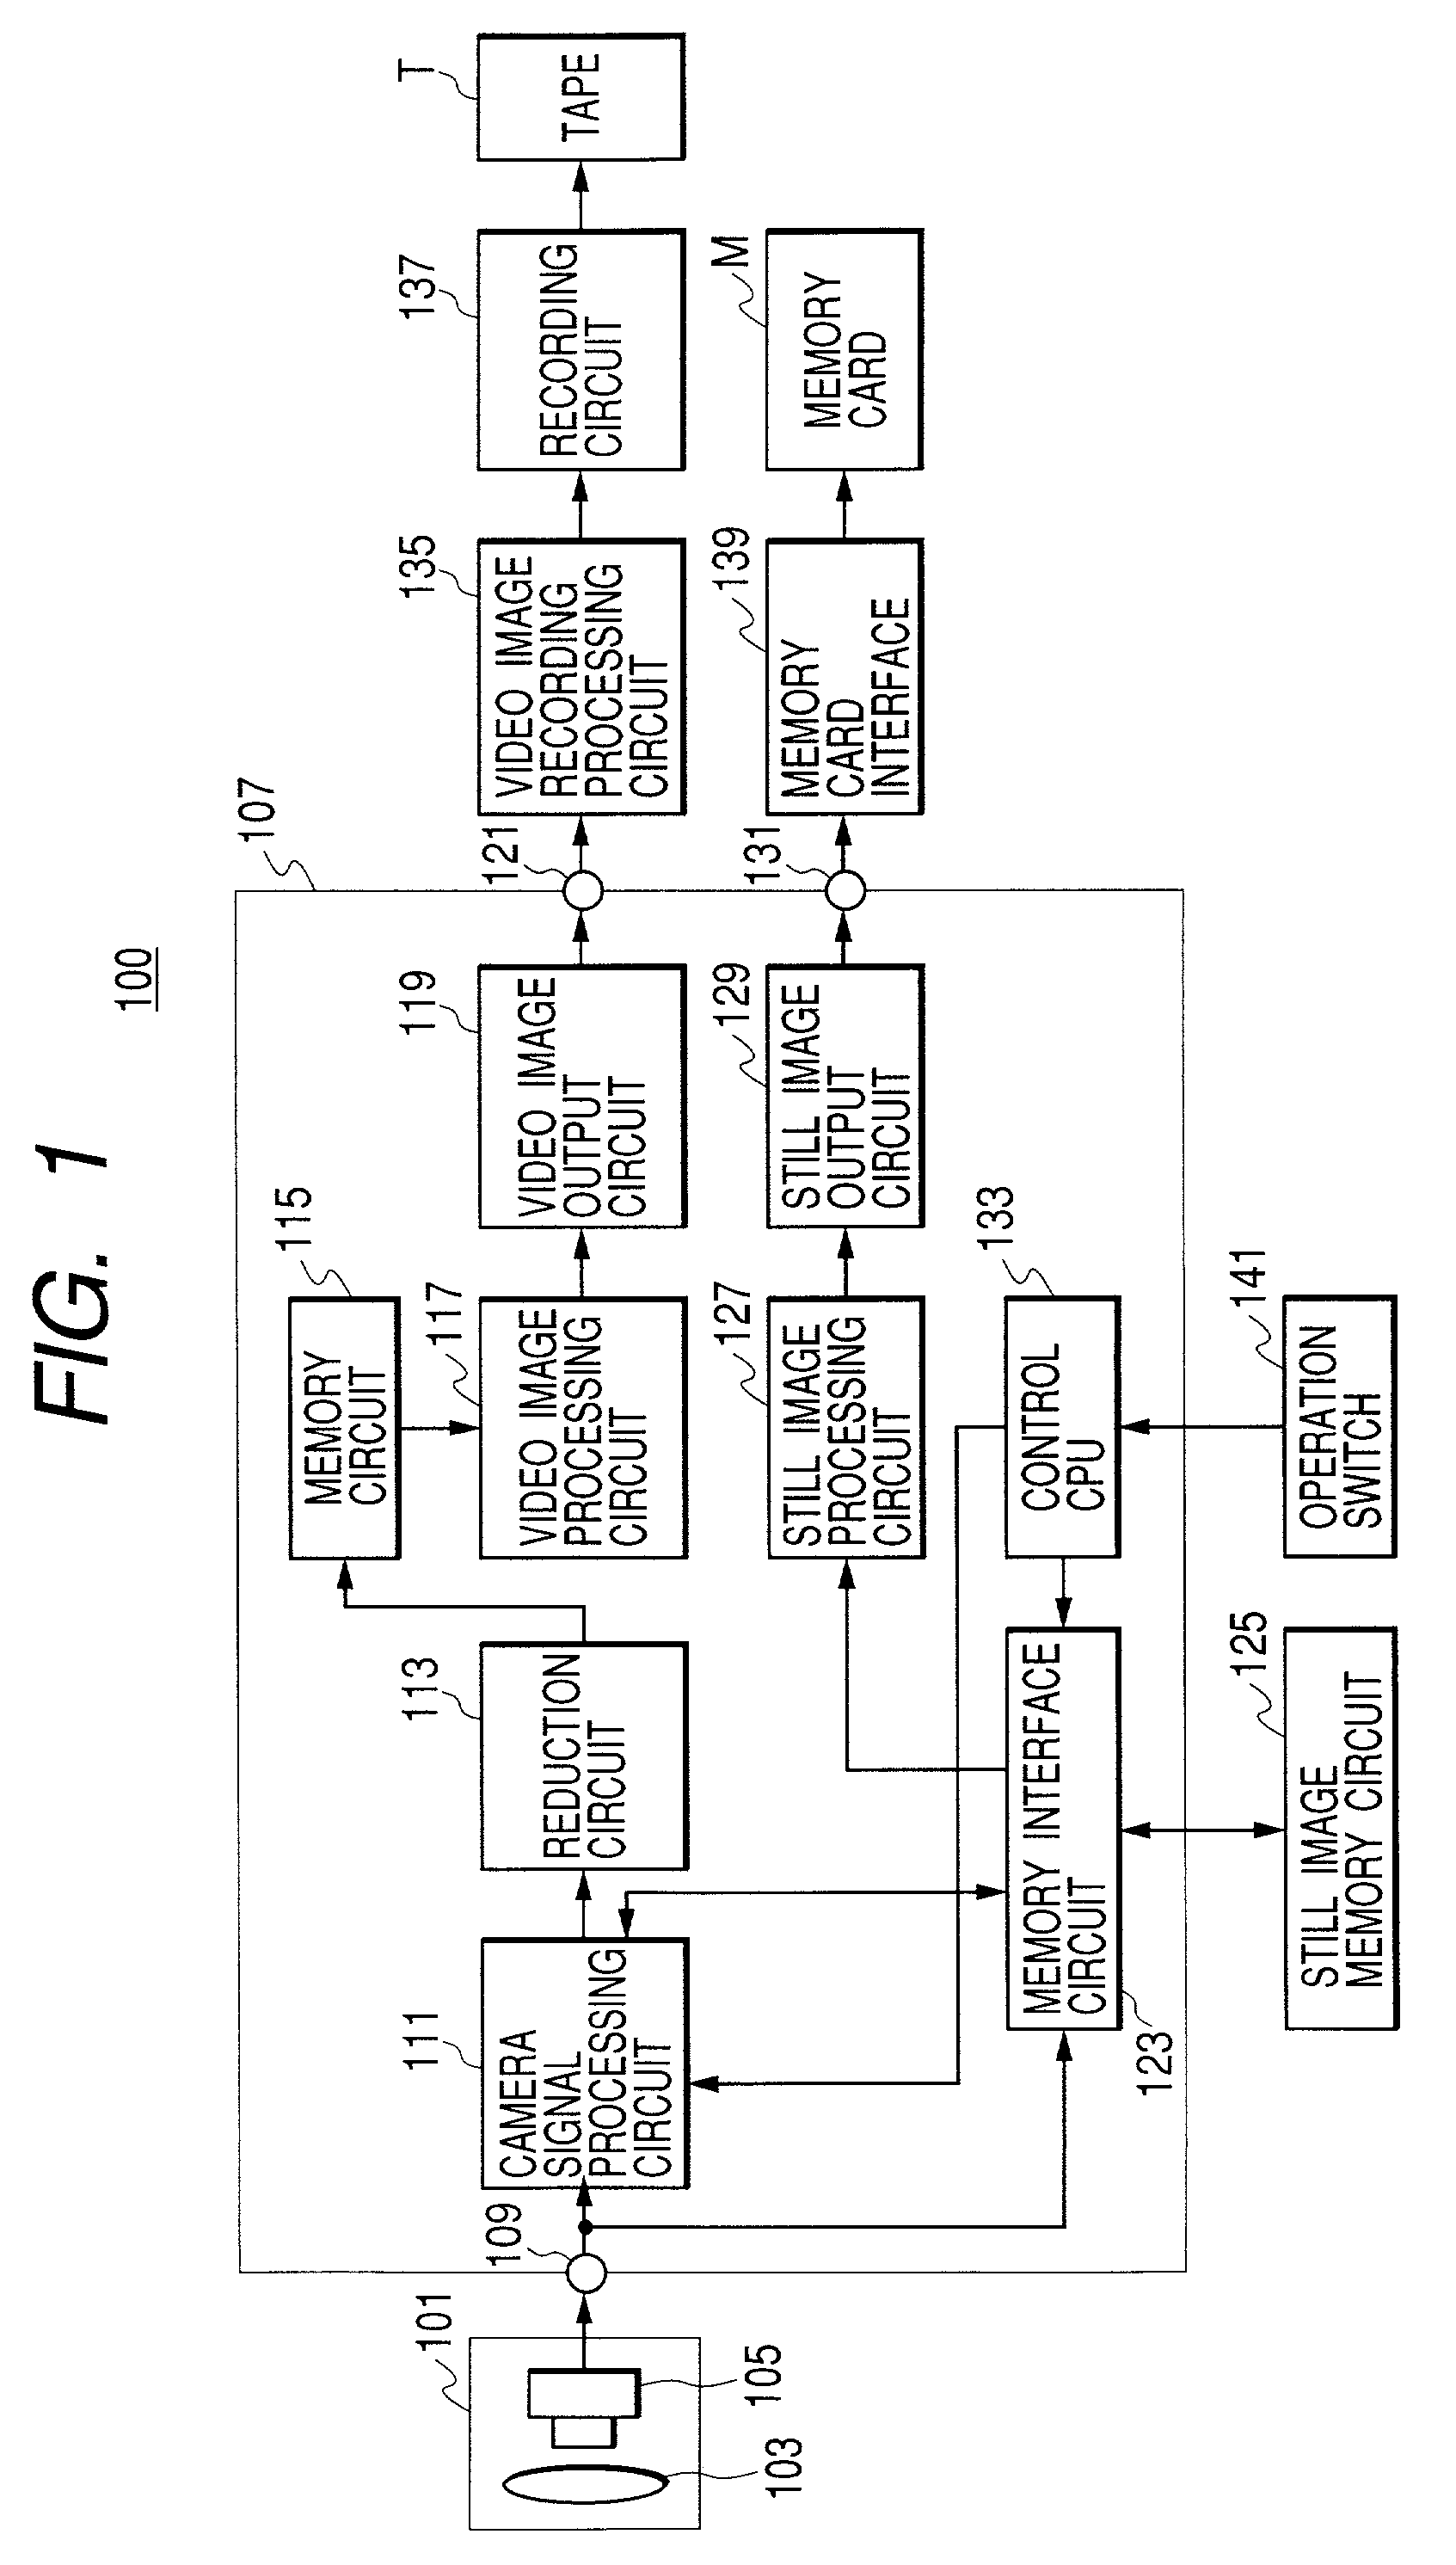 Image pickup apparatus for processing an image signal by using memory